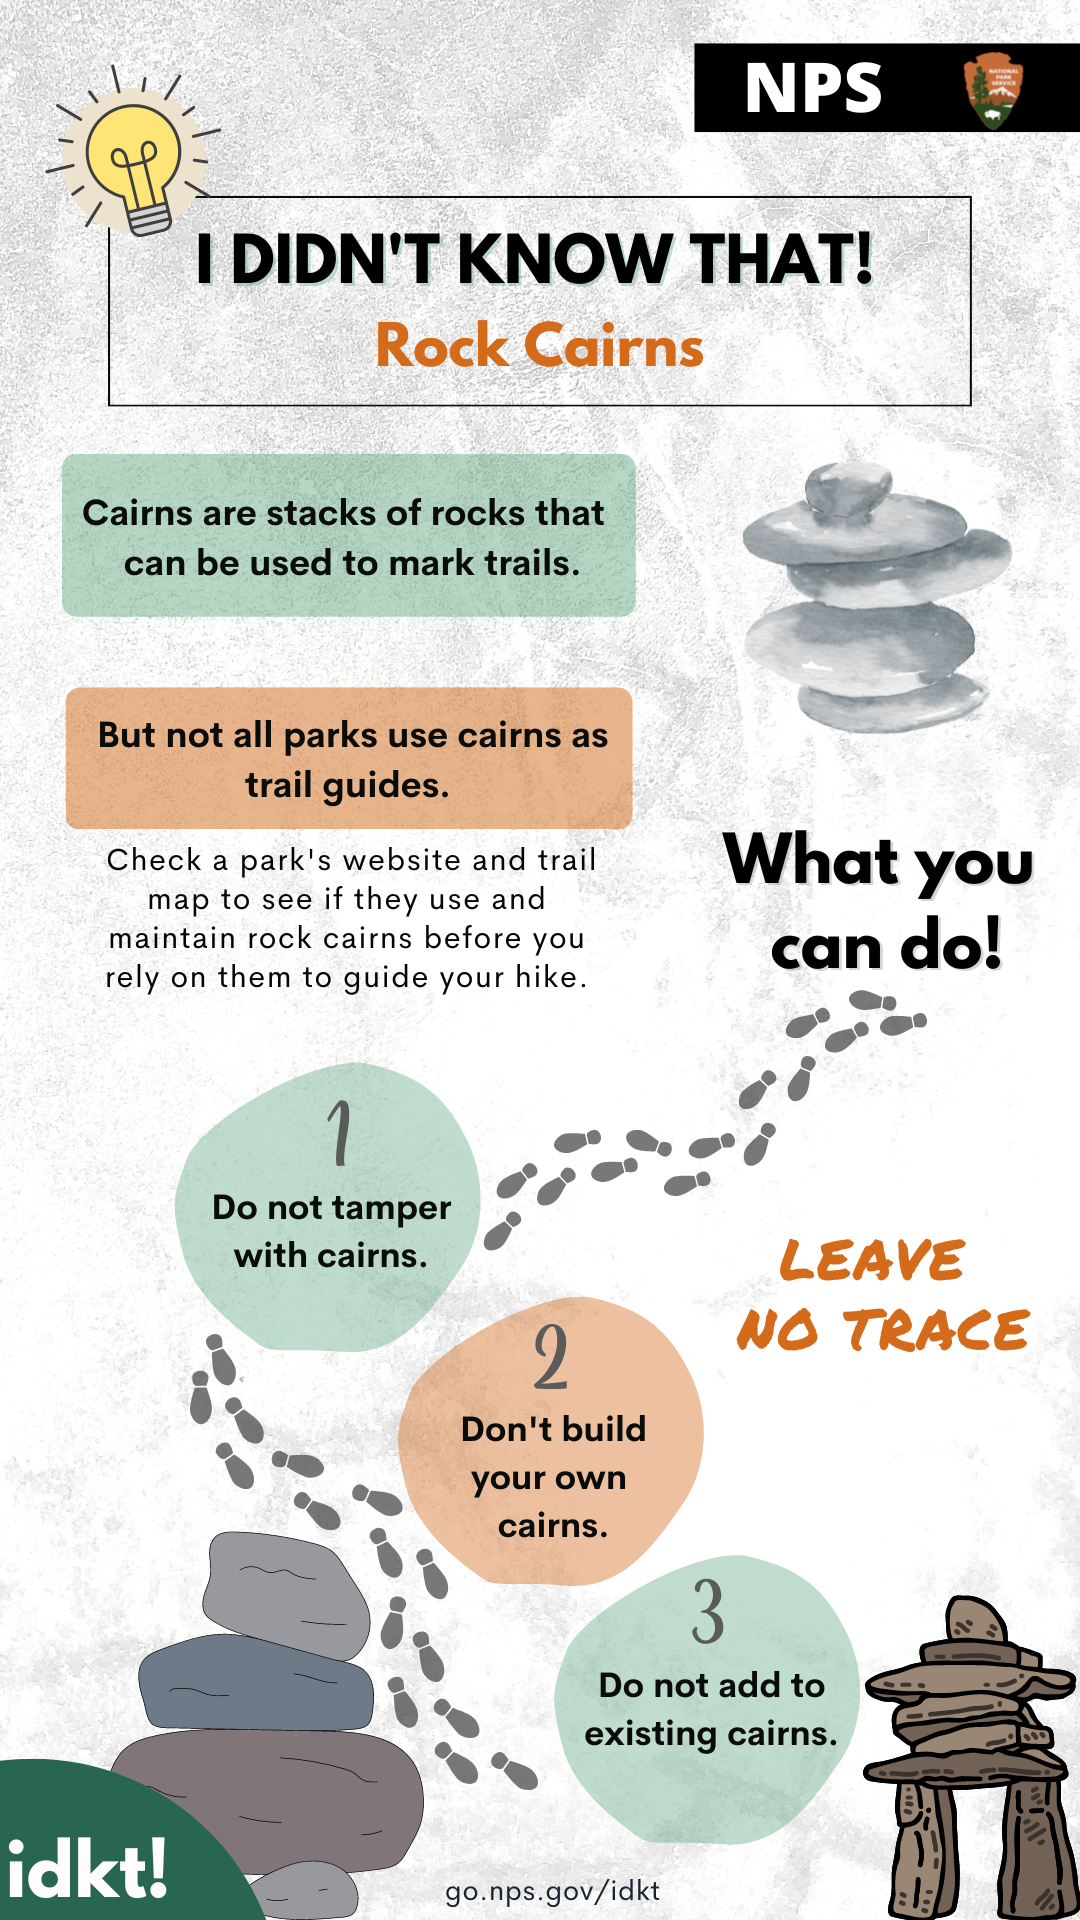 An infographic showing with tips on Cairns. Full text description available below image